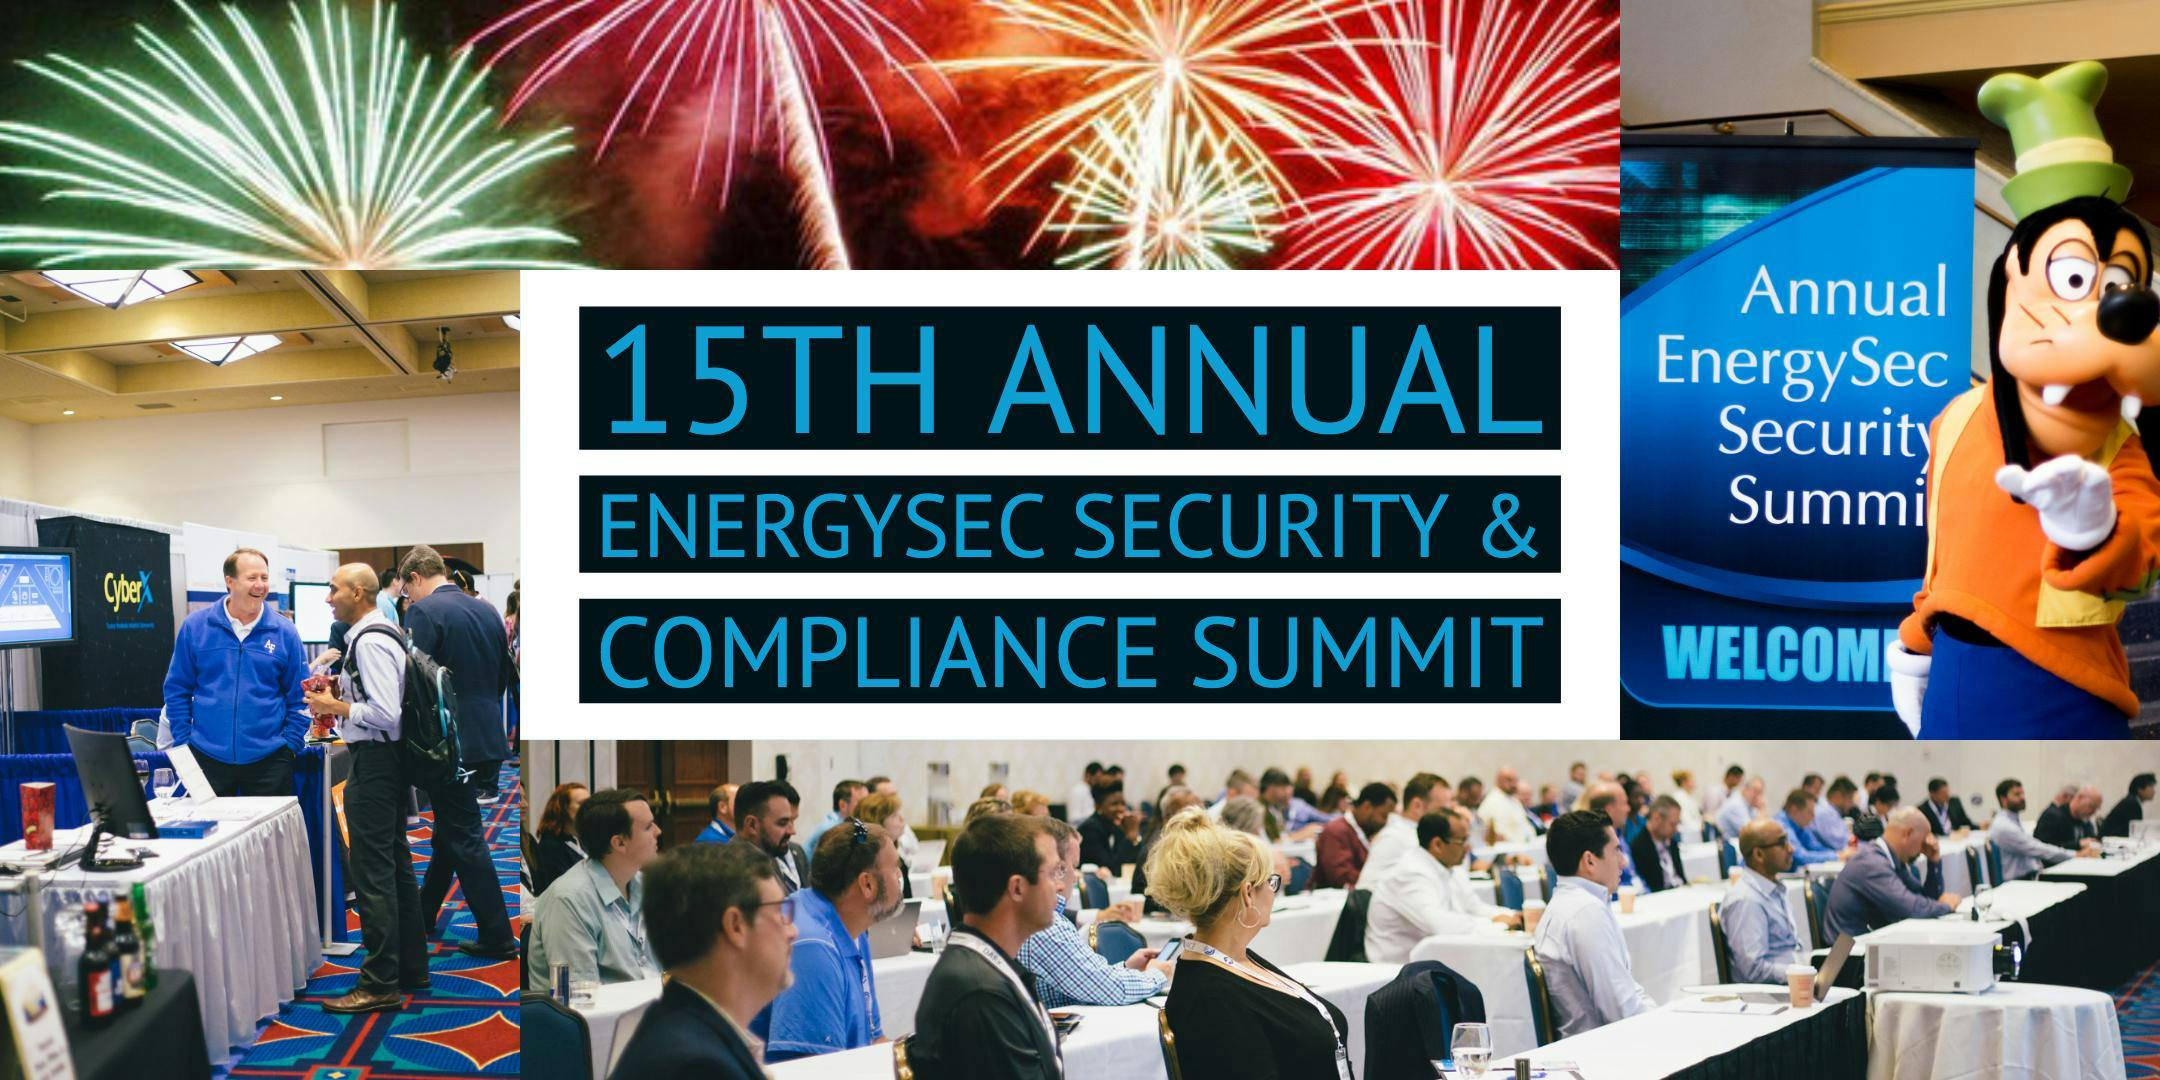 EnergySec 15th Annual Security & Compliance Summit